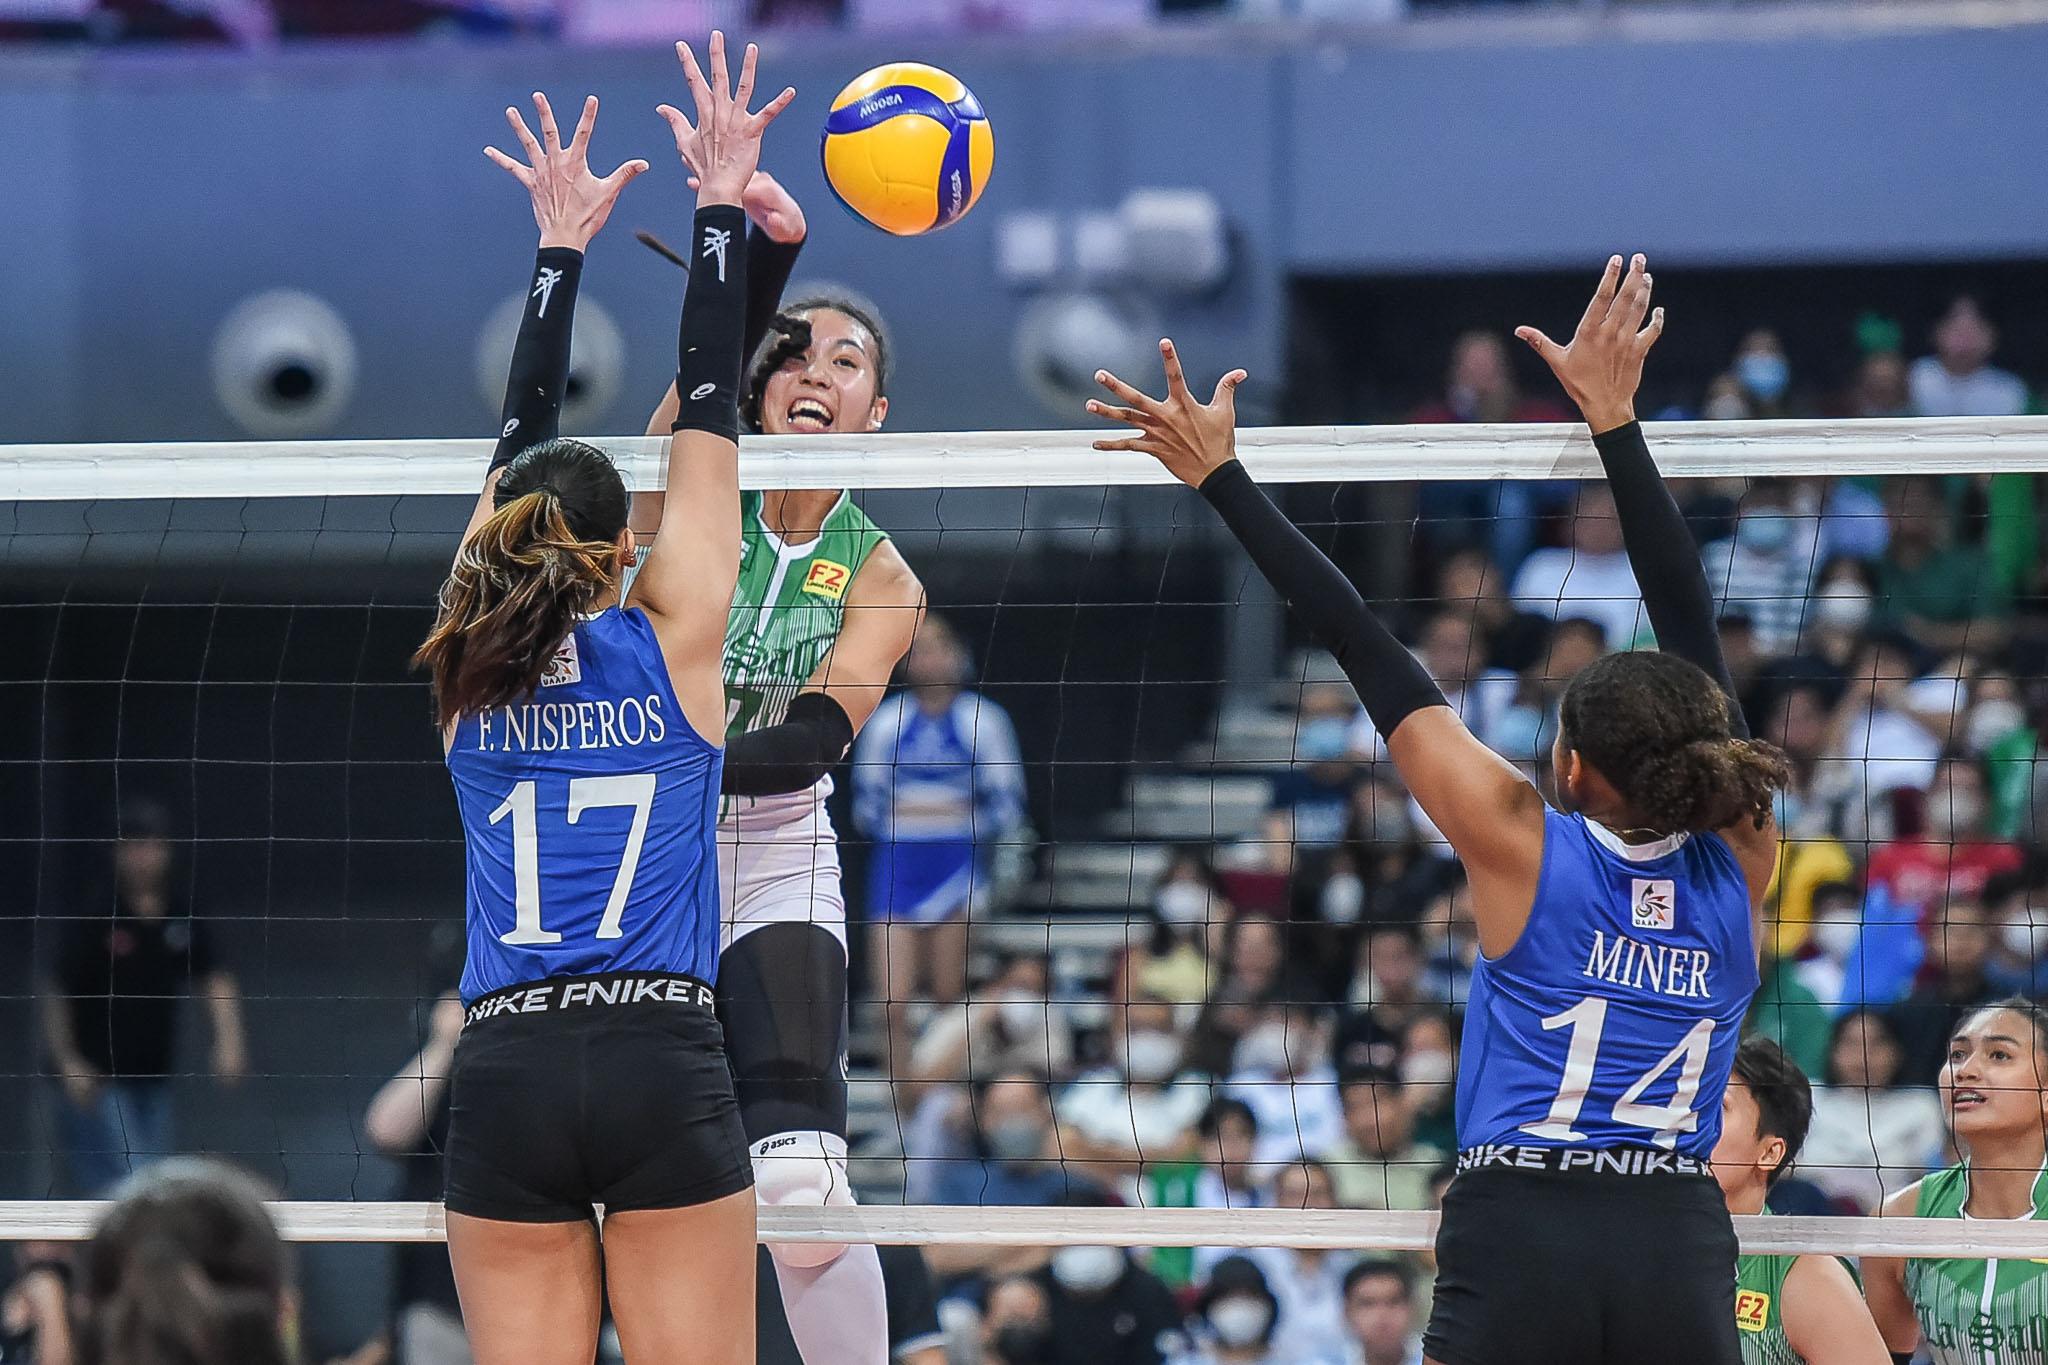 La Salle asserts mastery over Ateneo to secure top seed; UST completes Final Four cast GMA News Online